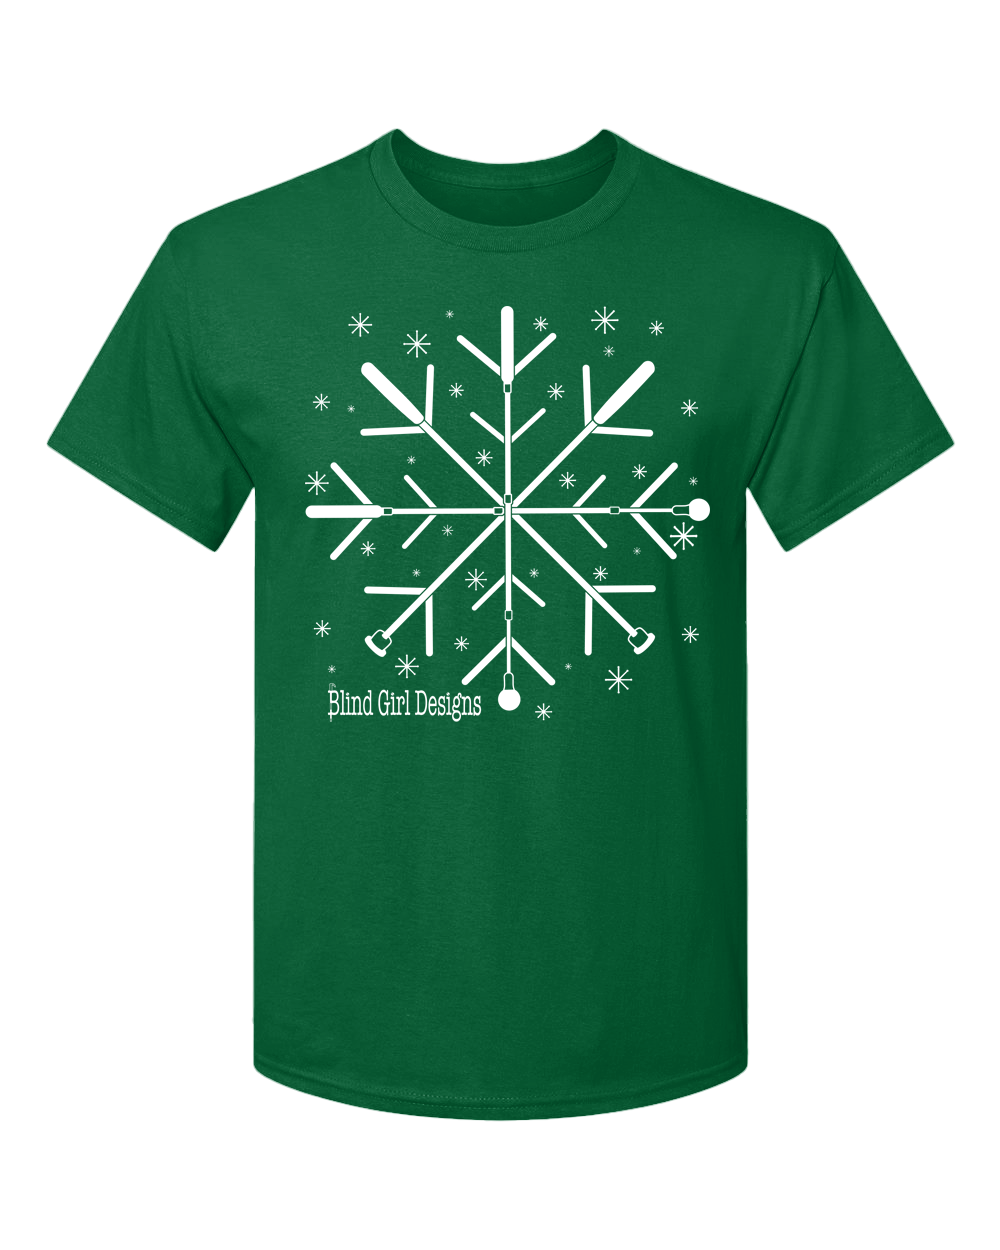 New! 3D Tactile White Cane Snowflake T-Shirt - deep forest green